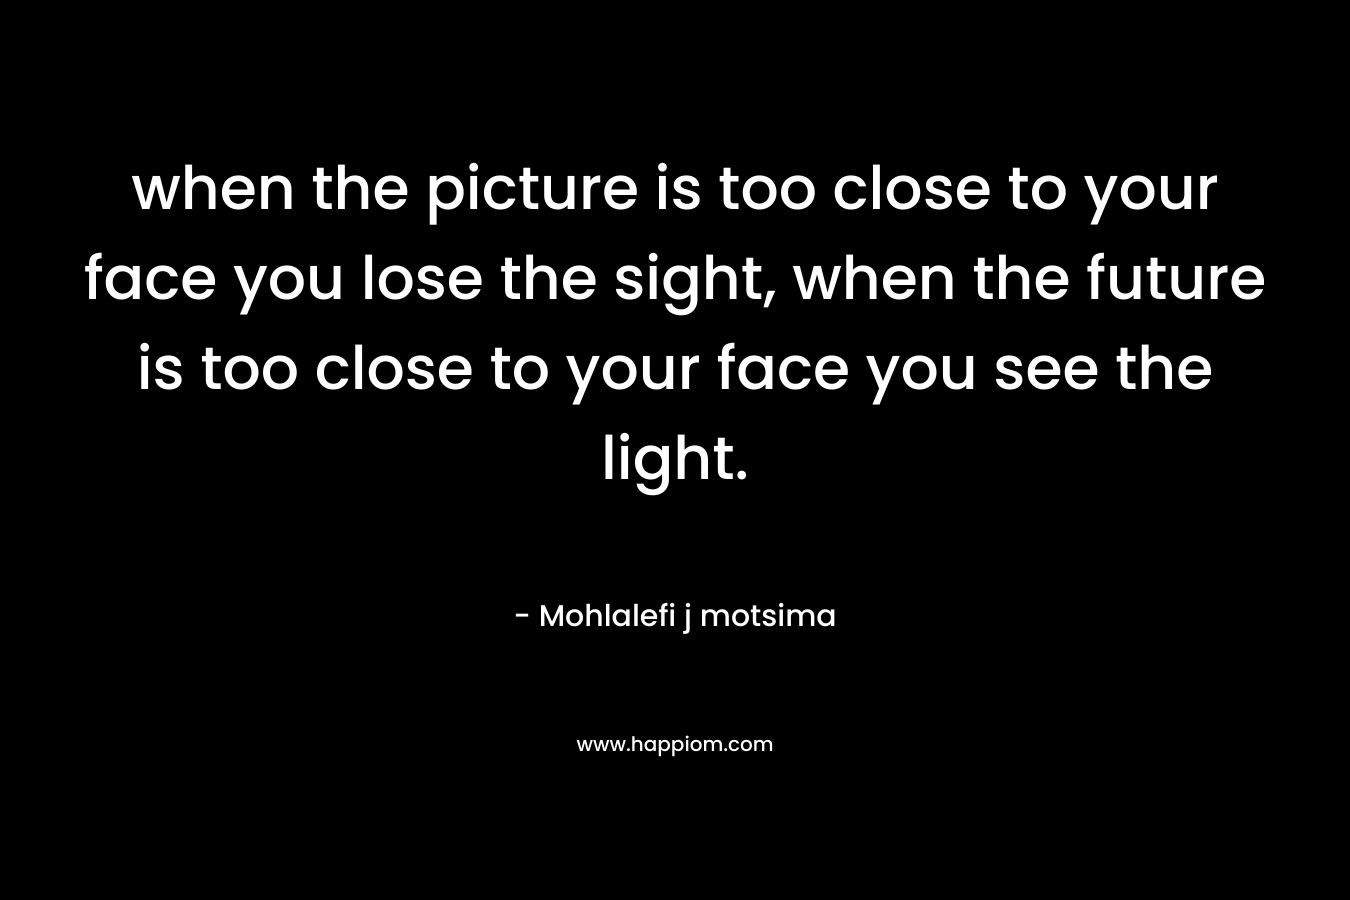 when the picture is too close to your face you lose the sight, when the future is too close to your face you see the light.